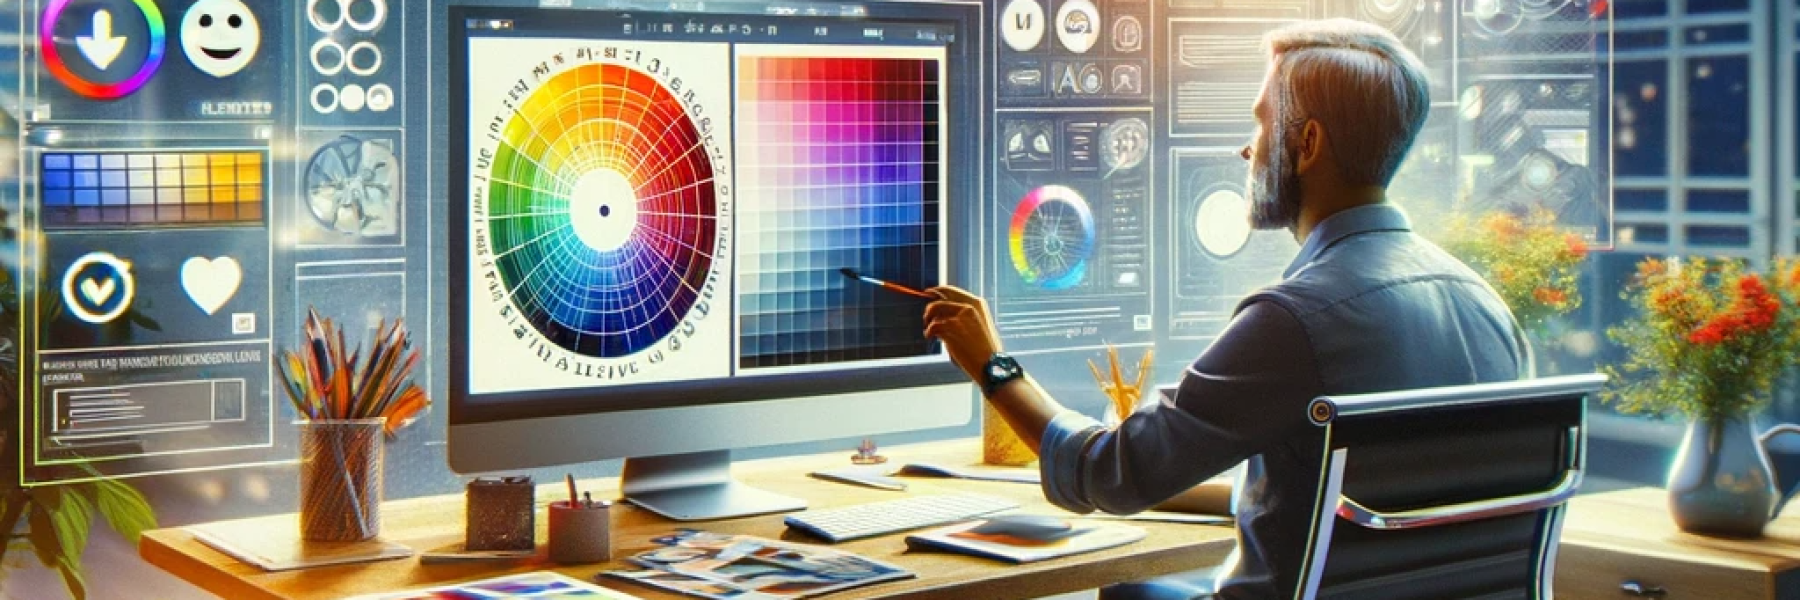 dalle-2024-01-18-16-52-46-an-artistic-representation-of-a-web-designer-analyzing-a-color-wheel-on-a-computer-screen-with-various-website-elements-in-the-background-showcasing-1